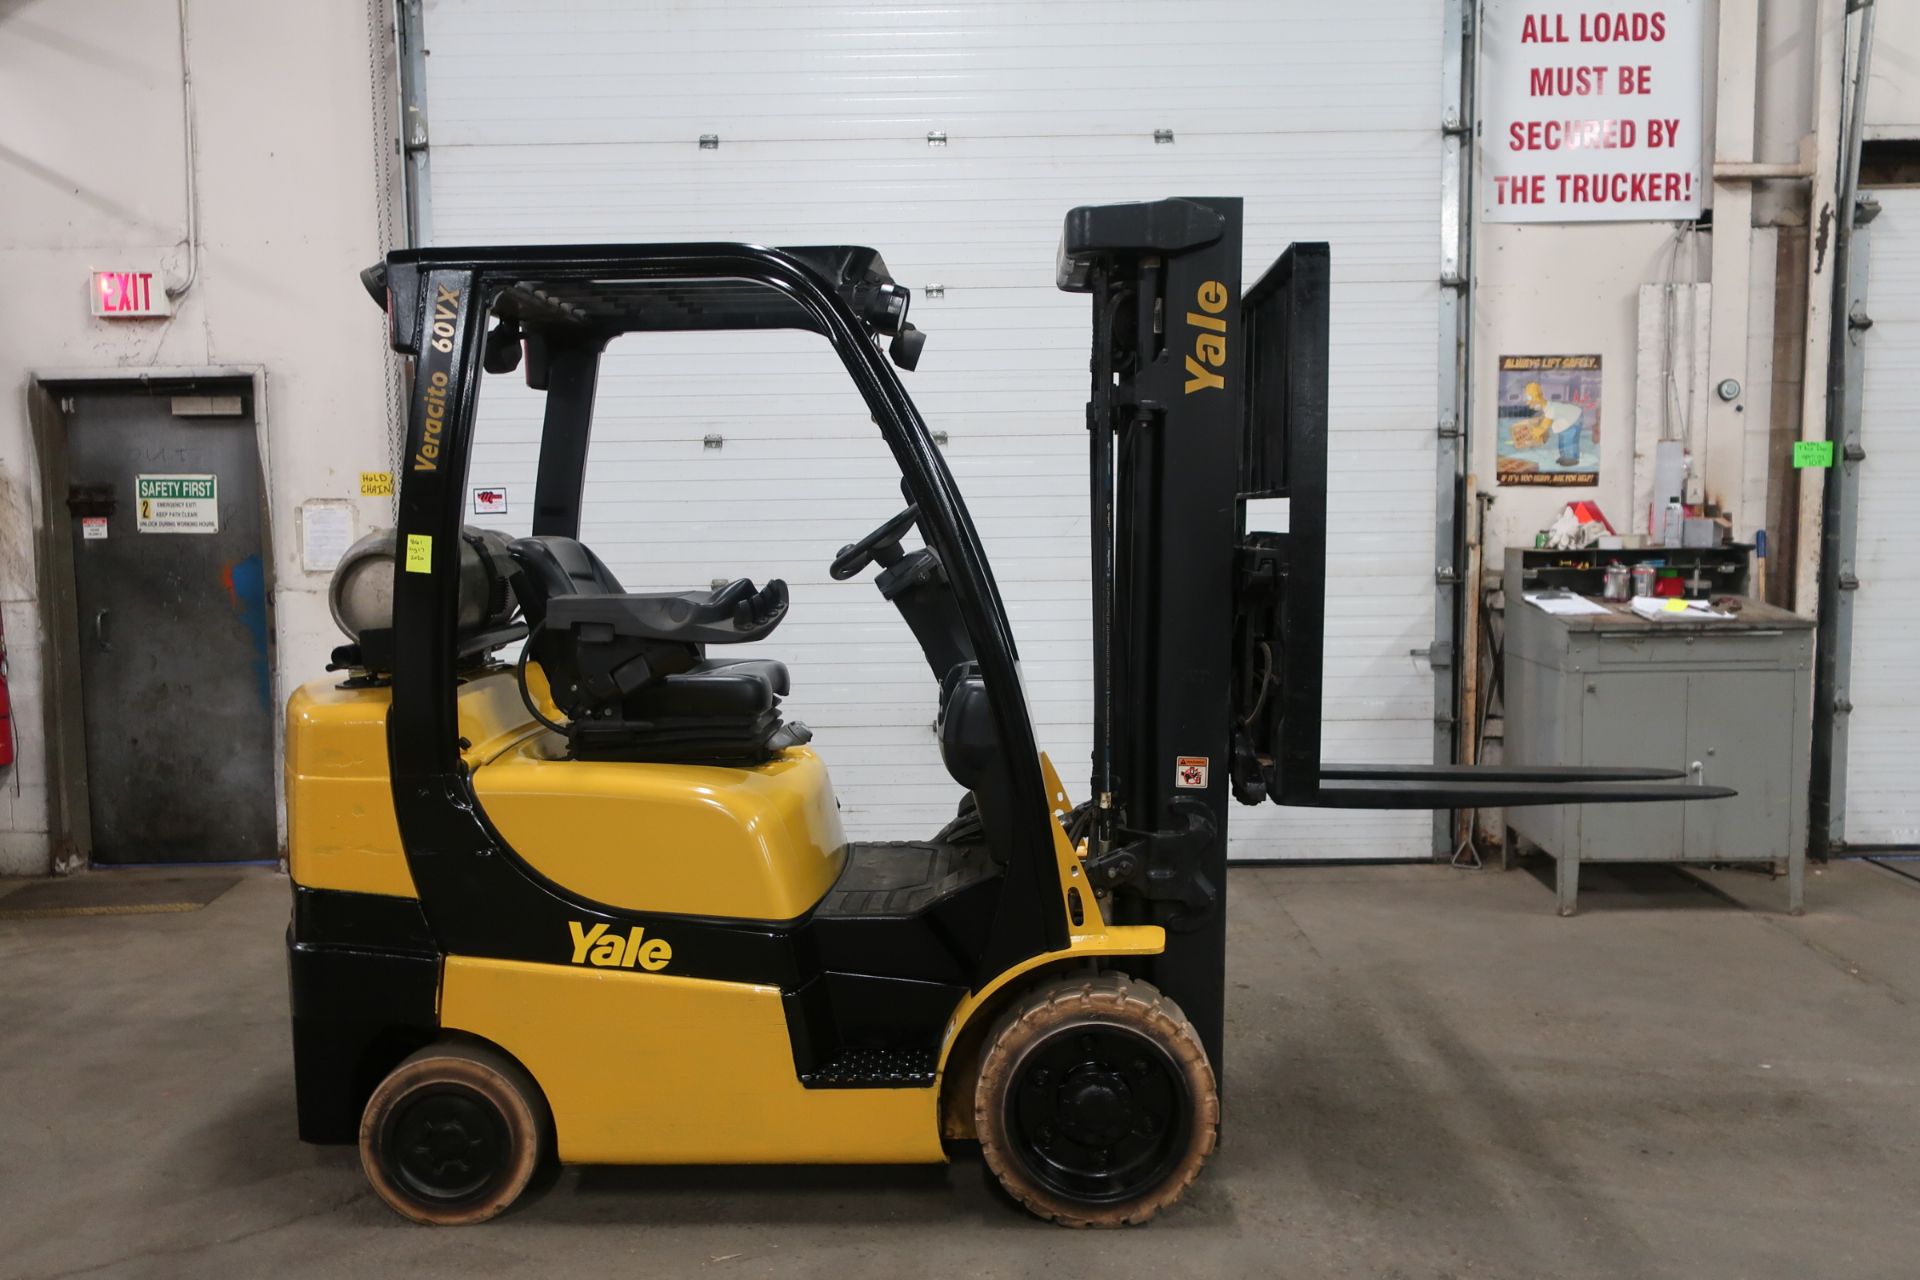 FREE CUSTOMS - 2015 Yale 6000lbs Capacity Forklift with 3-stage mast - LPG (propane) with